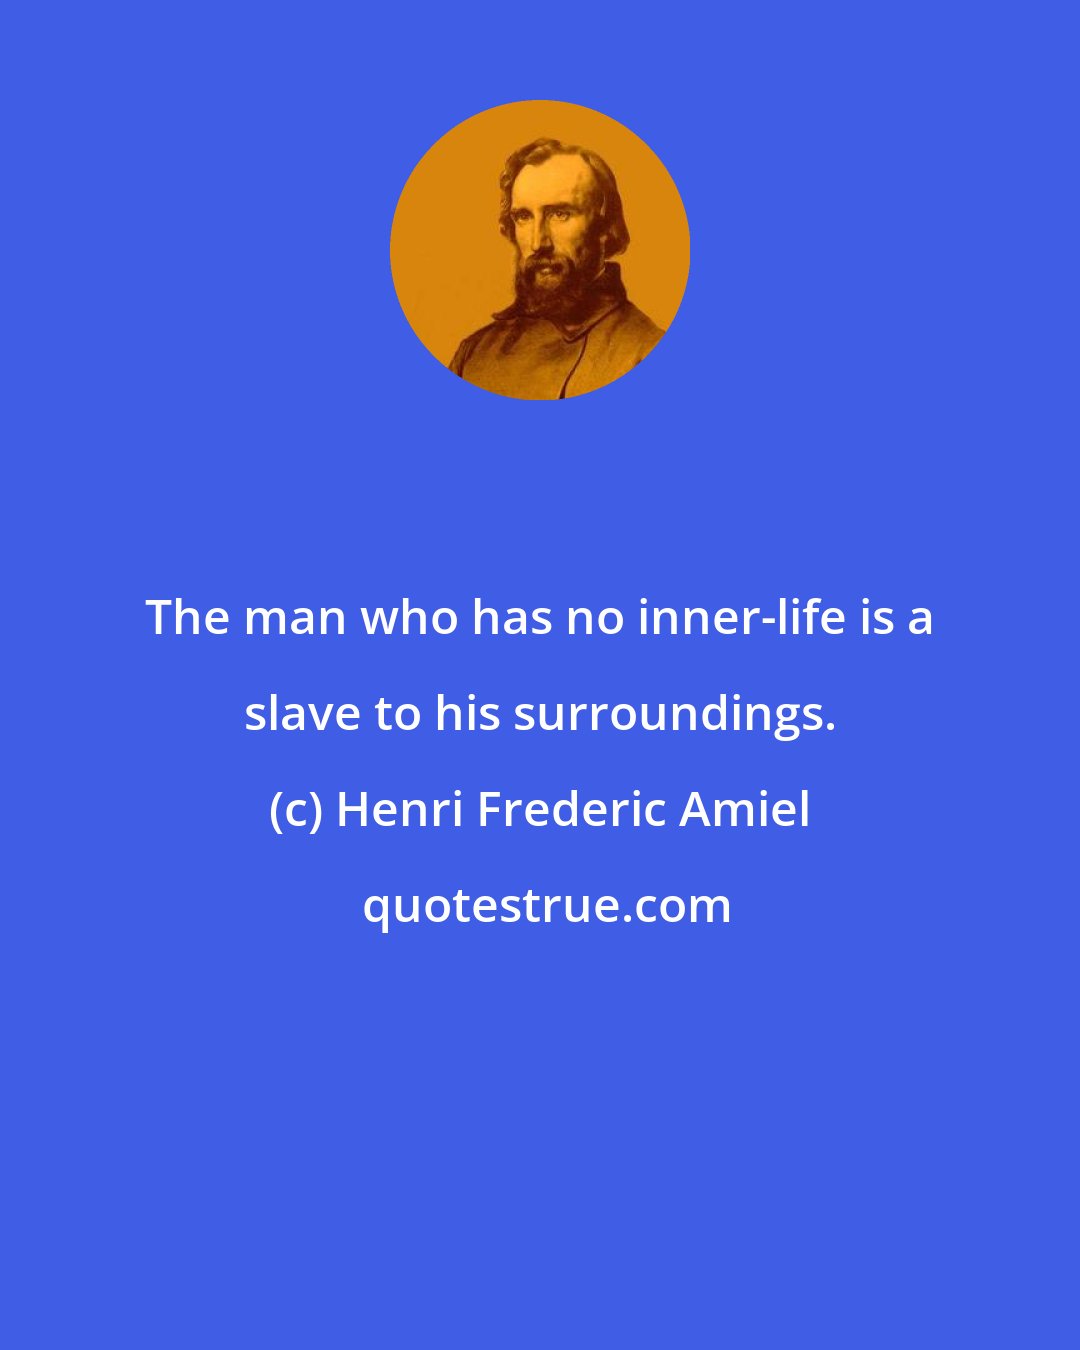 Henri Frederic Amiel: The man who has no inner-life is a slave to his surroundings.